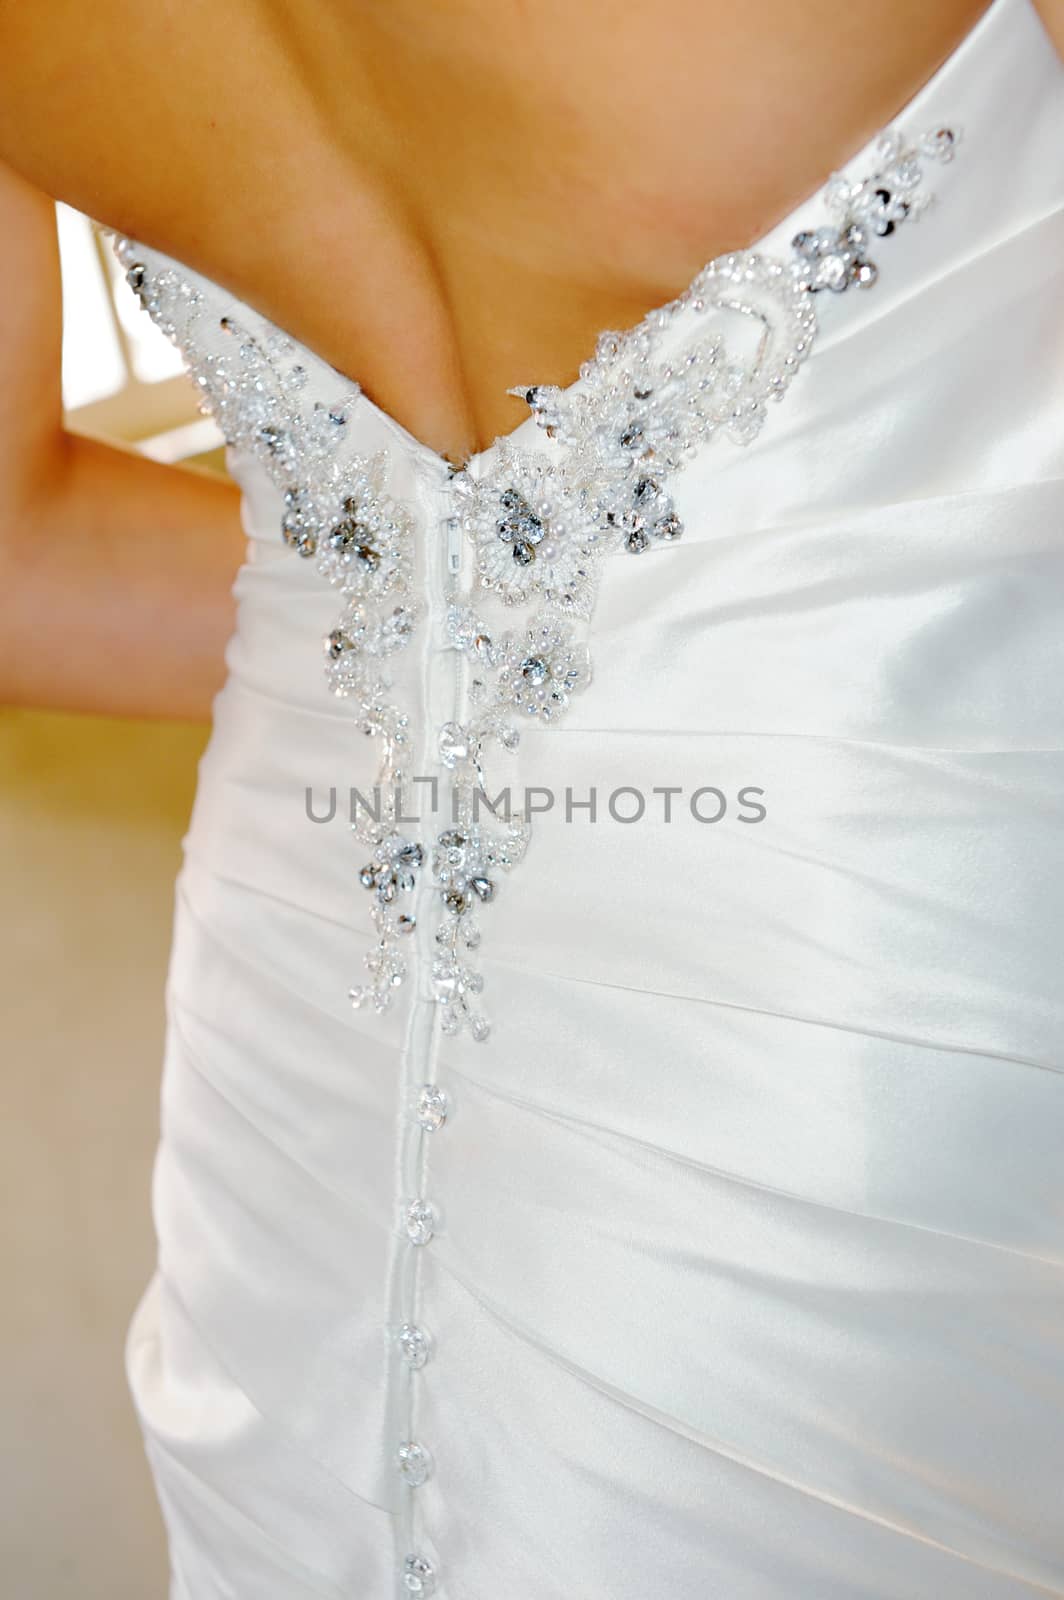 Brides dress detail by kmwphotography